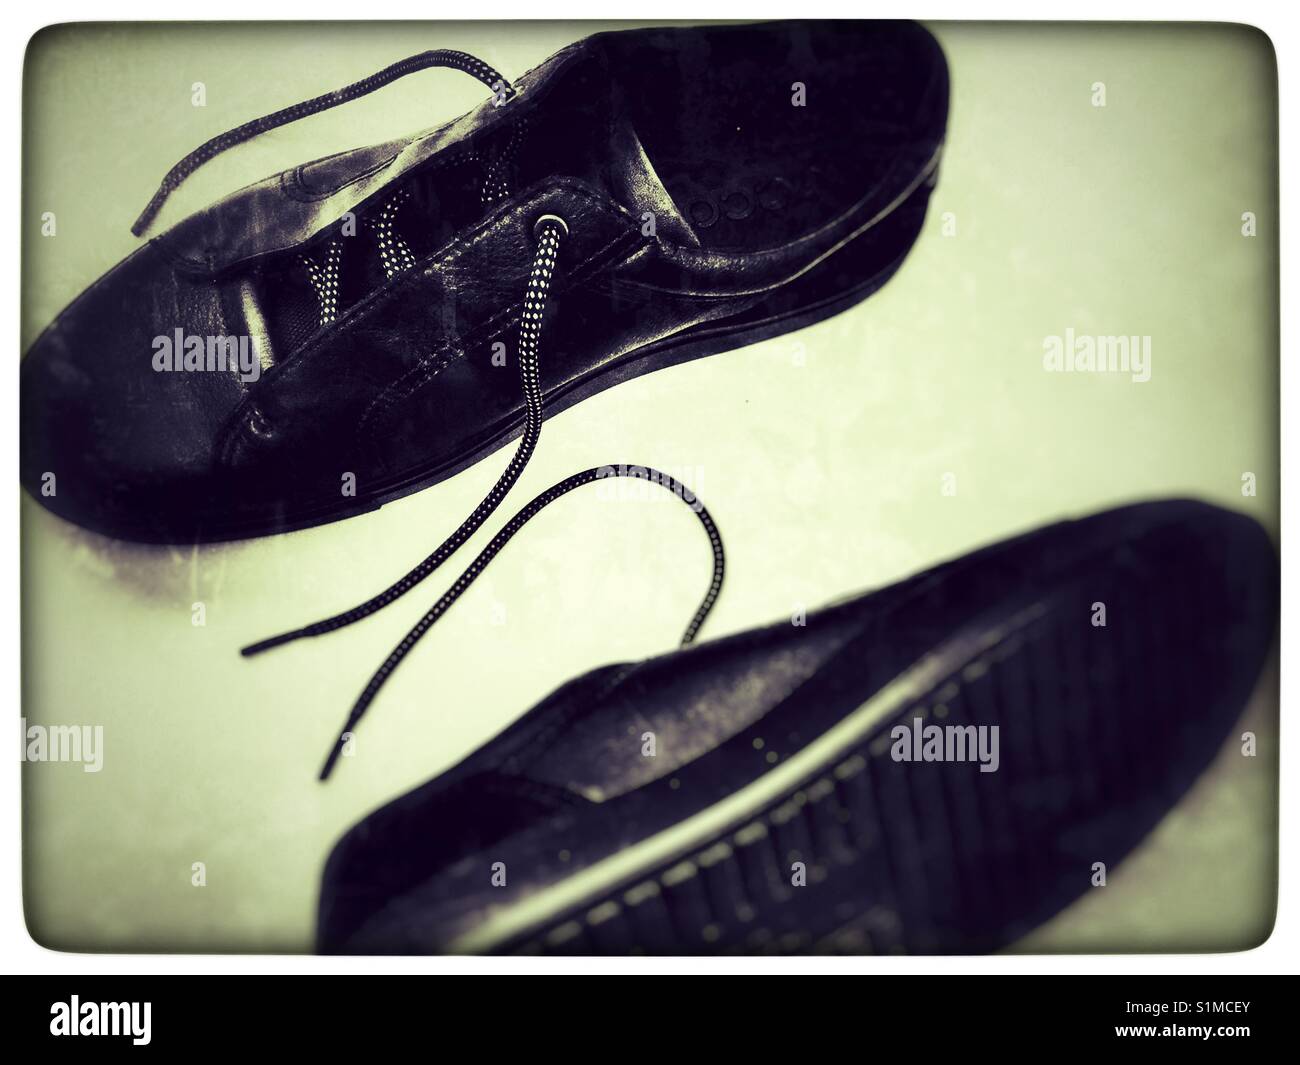 Ecco Shoes High Resolution Stock Photography and Images - Alamy